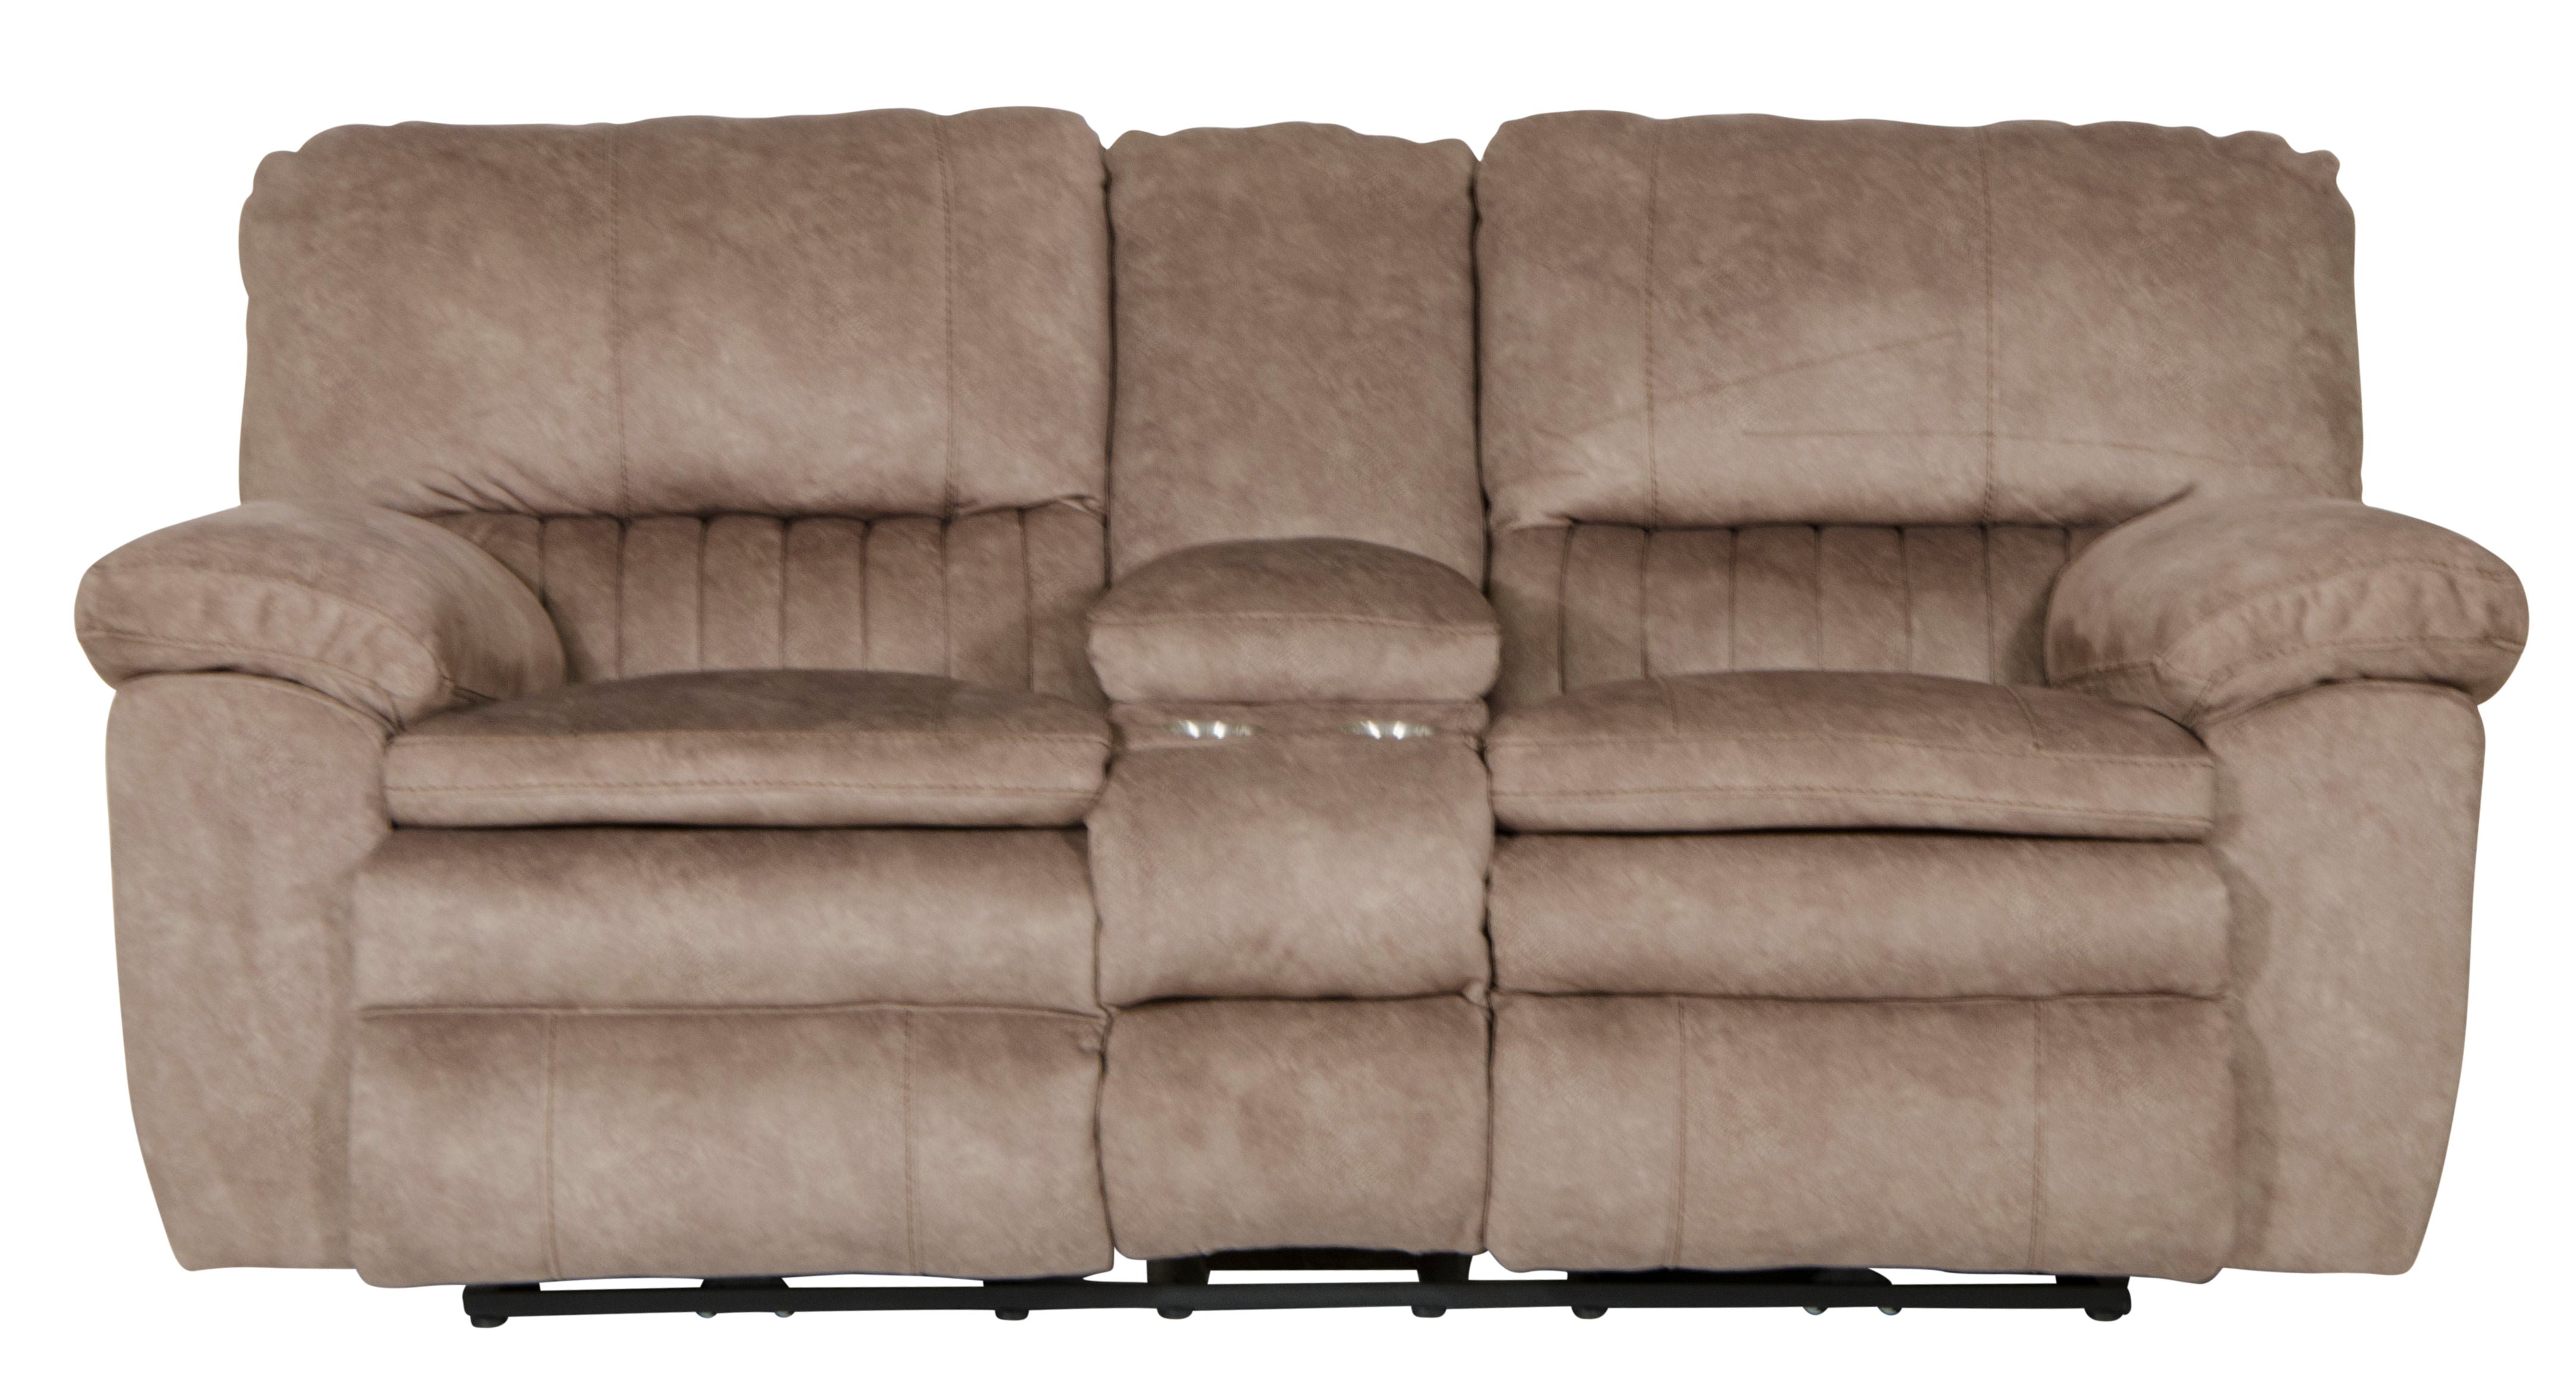 Reyes - Lay Flat Reclining Console Loveseat With Storage & Cupholders - 5th Avenue Furniture